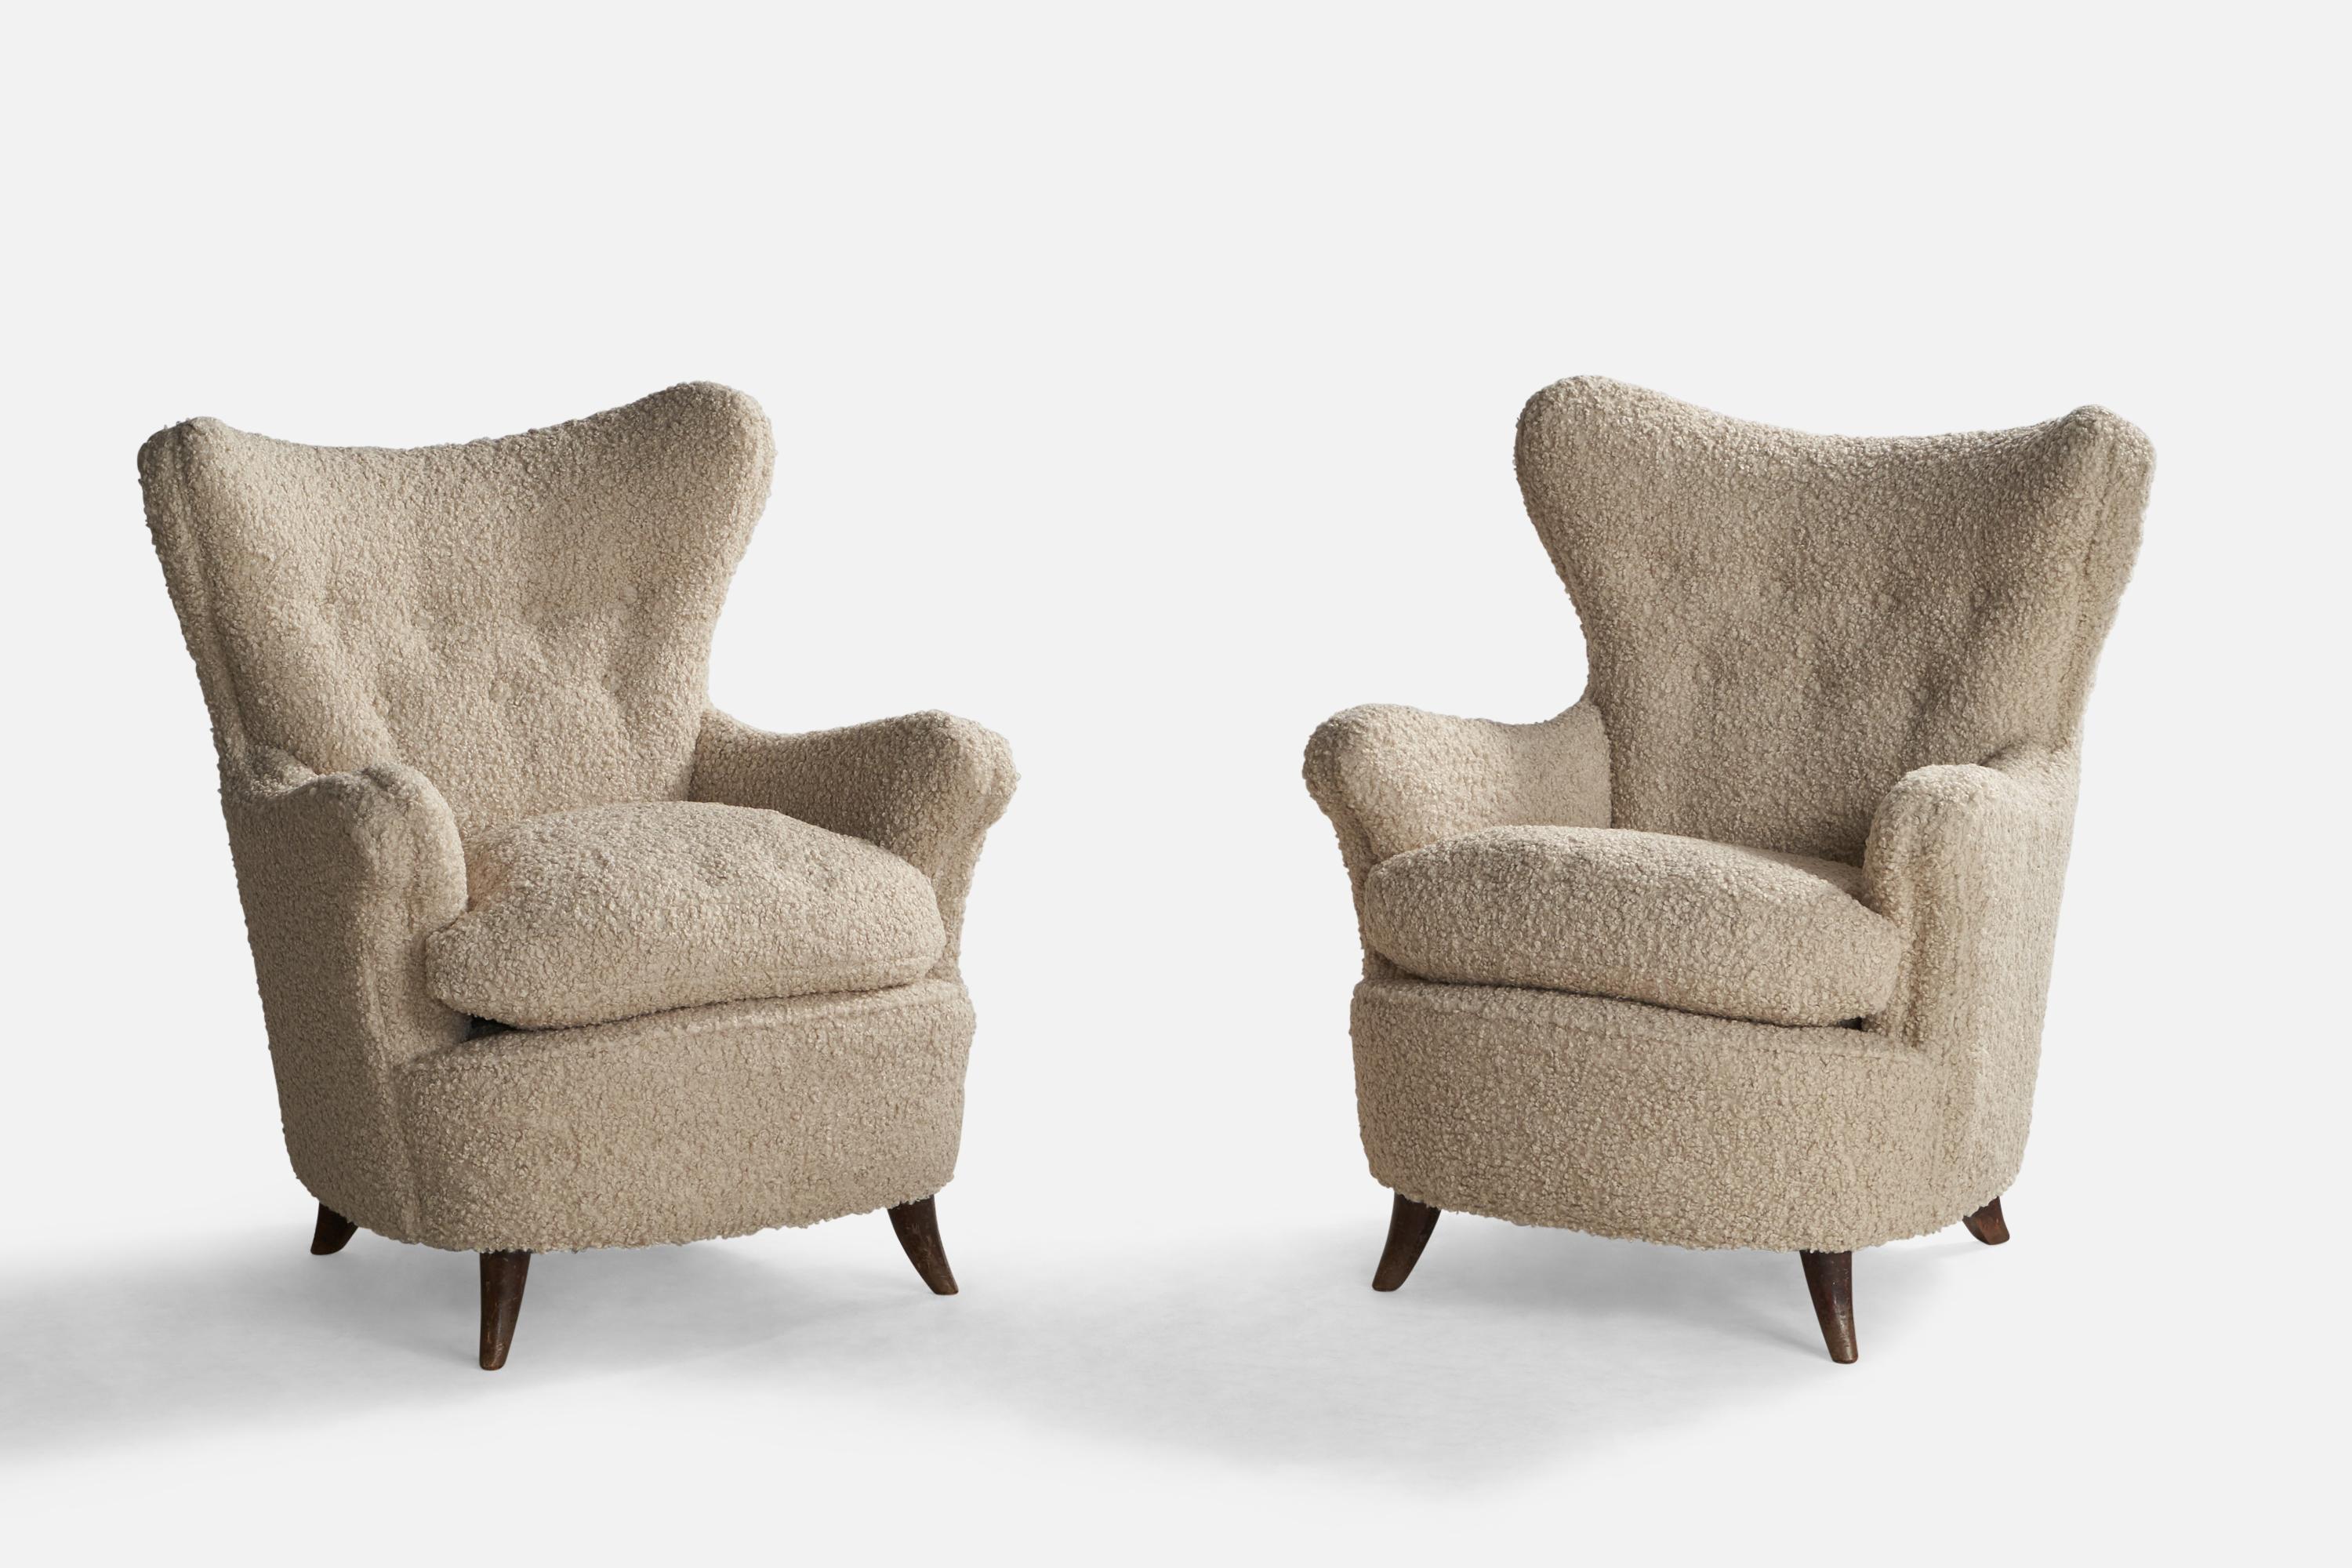 A pair of dark-stained wood and off-white bouclé fabric lounge chairs designed by Osvaldo Borsani and produced by Arredamenti Borsani, Italy, 1940s.

Seat height: 18.75”